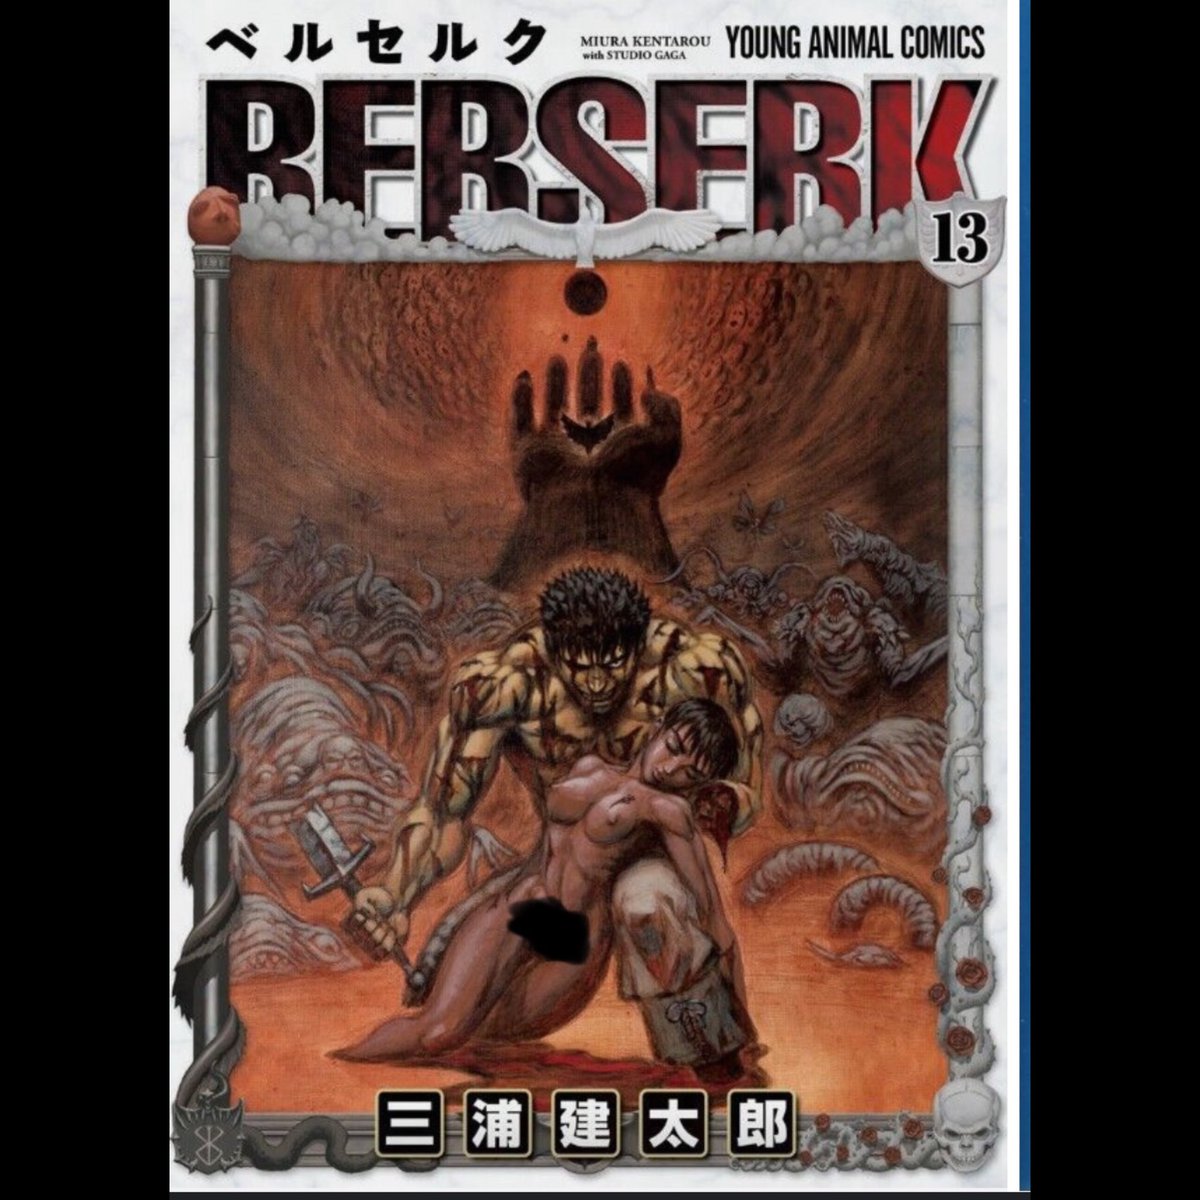 With the Eclipse happening today, there wouldn’t be a better time to release some of these photos taken by the talented @jscosplayart it was a pleasure to finally get the berserk armor but since it’s the eclipse here’s a cover photo from the Berserk manga issue 13. It was a…